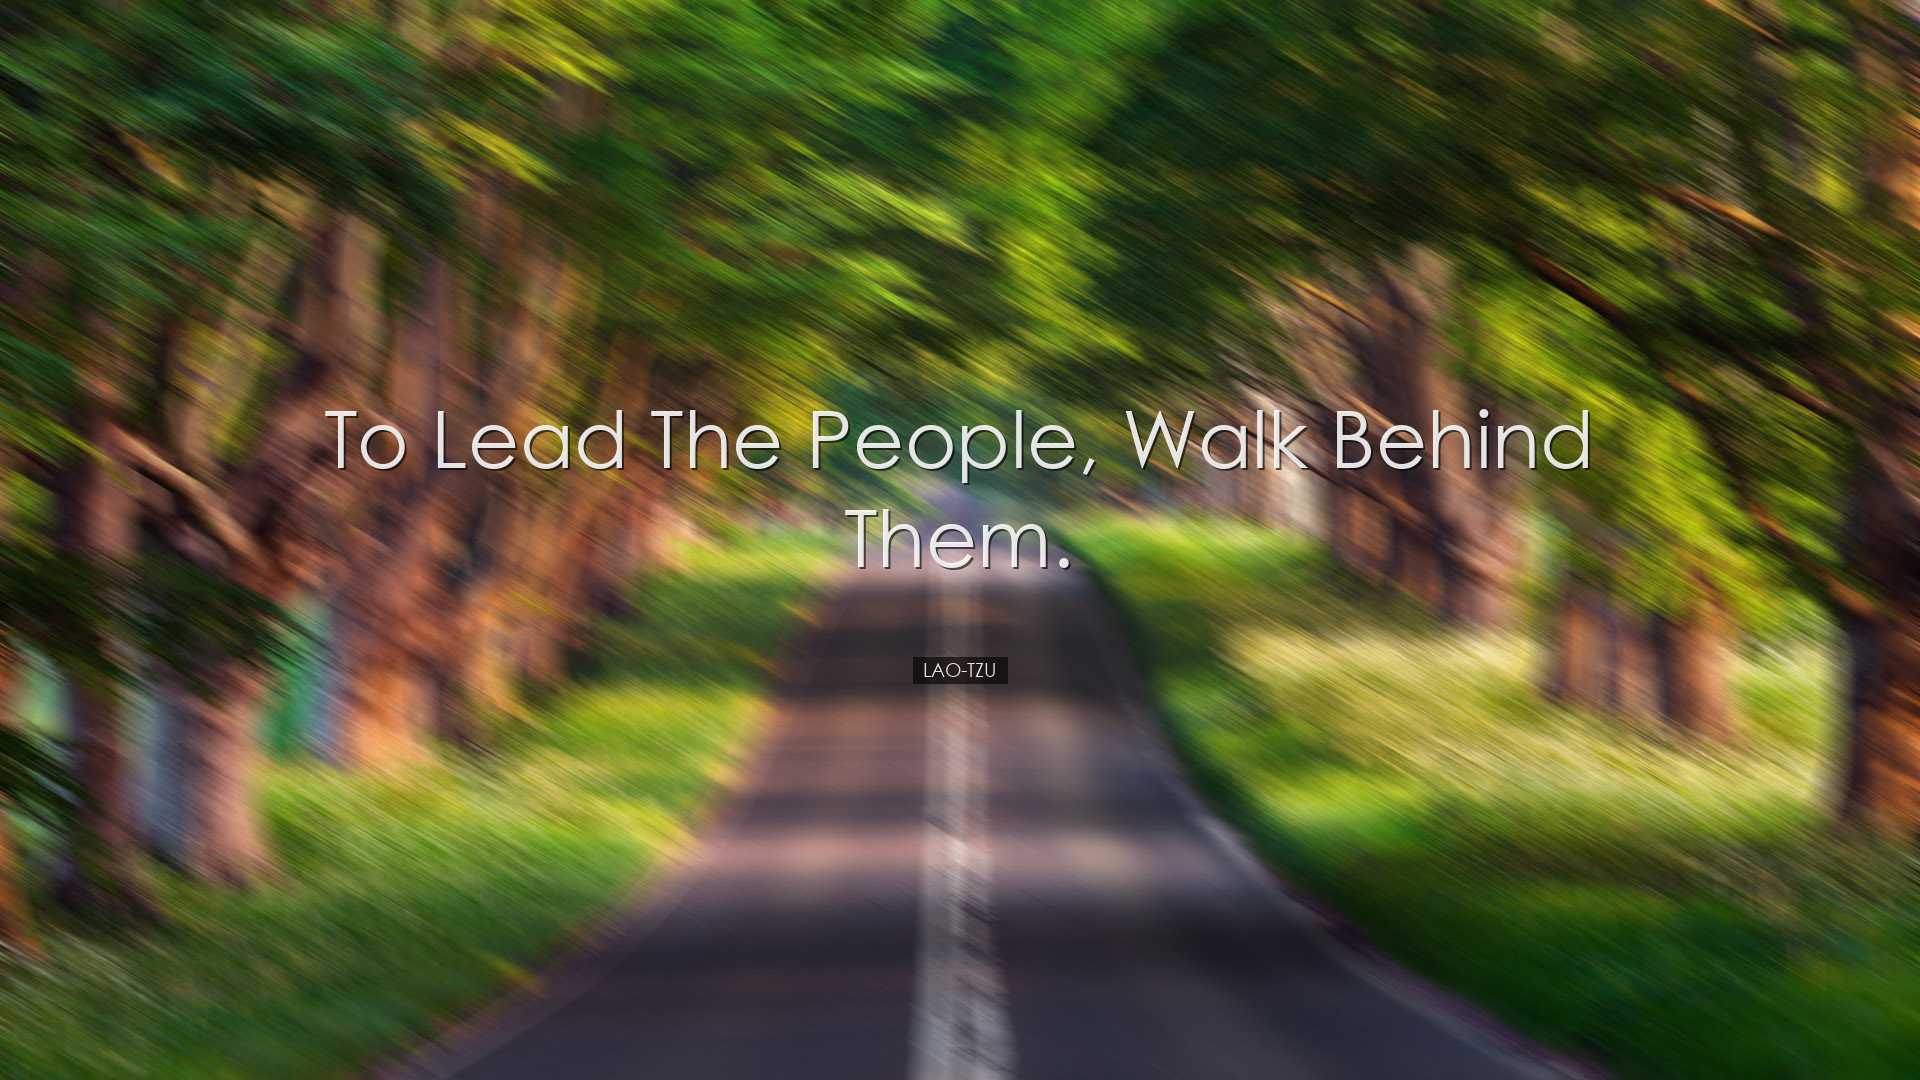 To lead the people, walk behind them. - Lao-Tzu